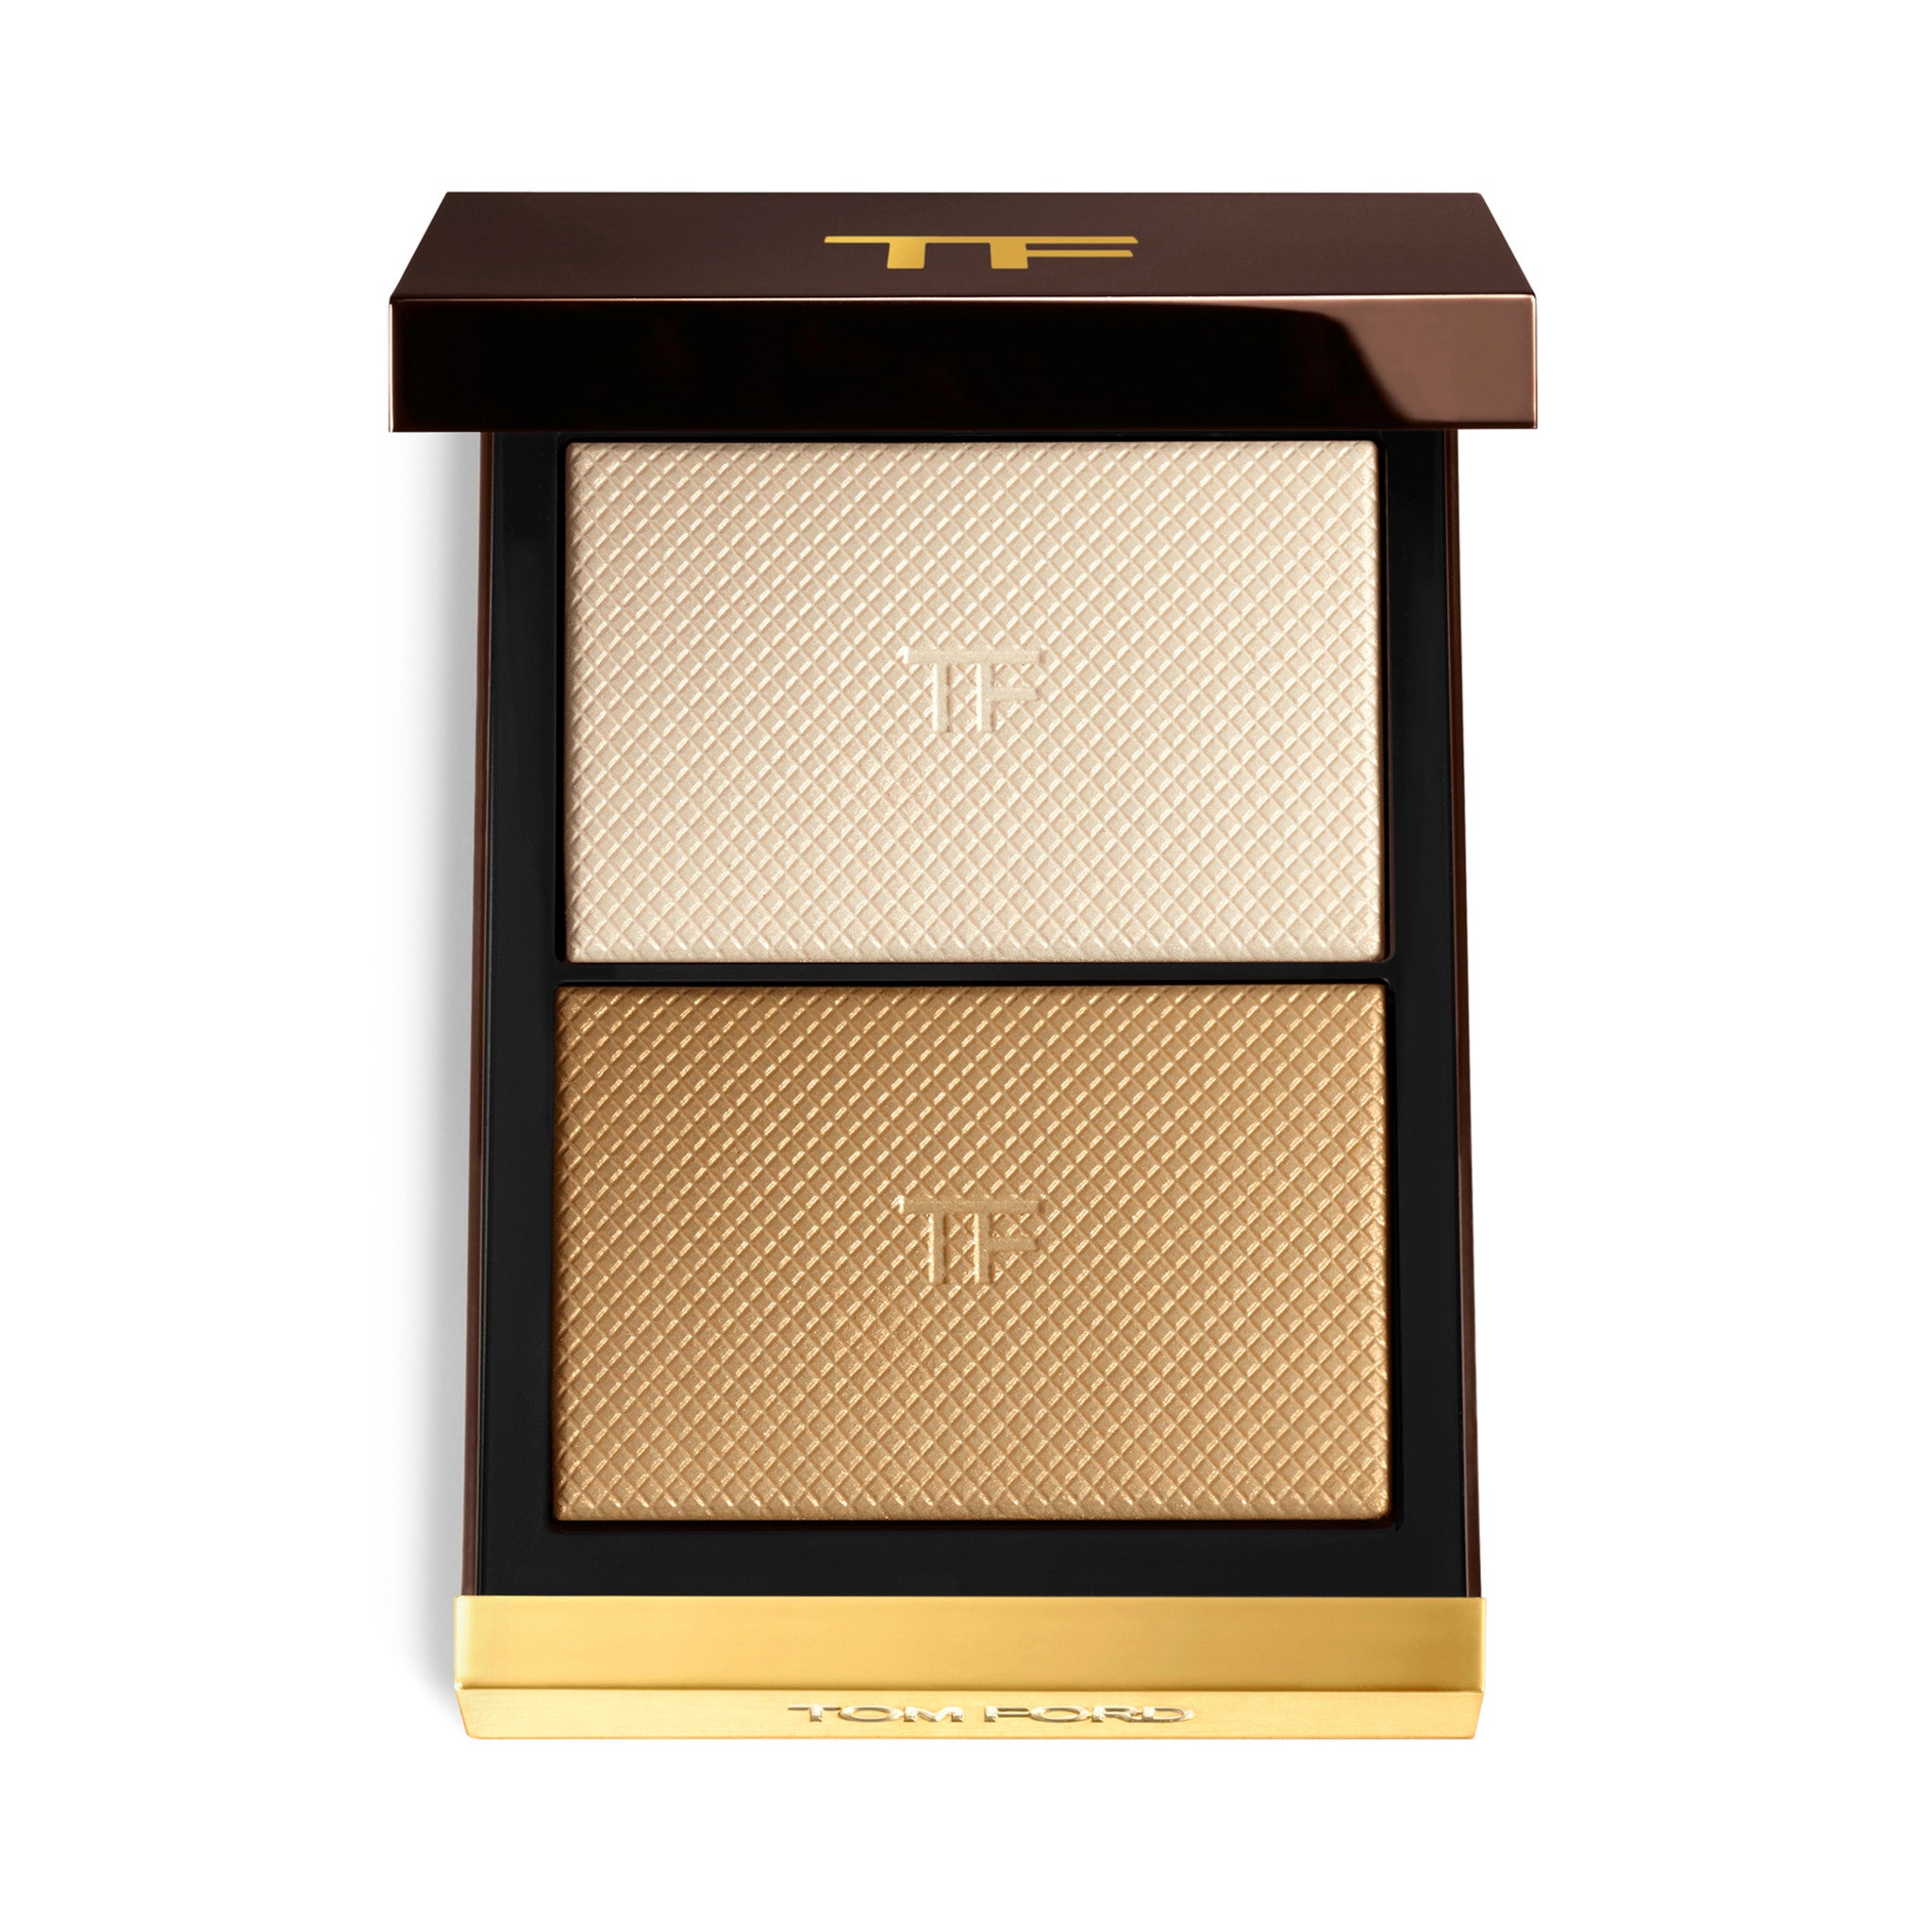 Tom Ford Shade and Illuminate Highlighting Duo Color/Shade variant: Nudelight main image.